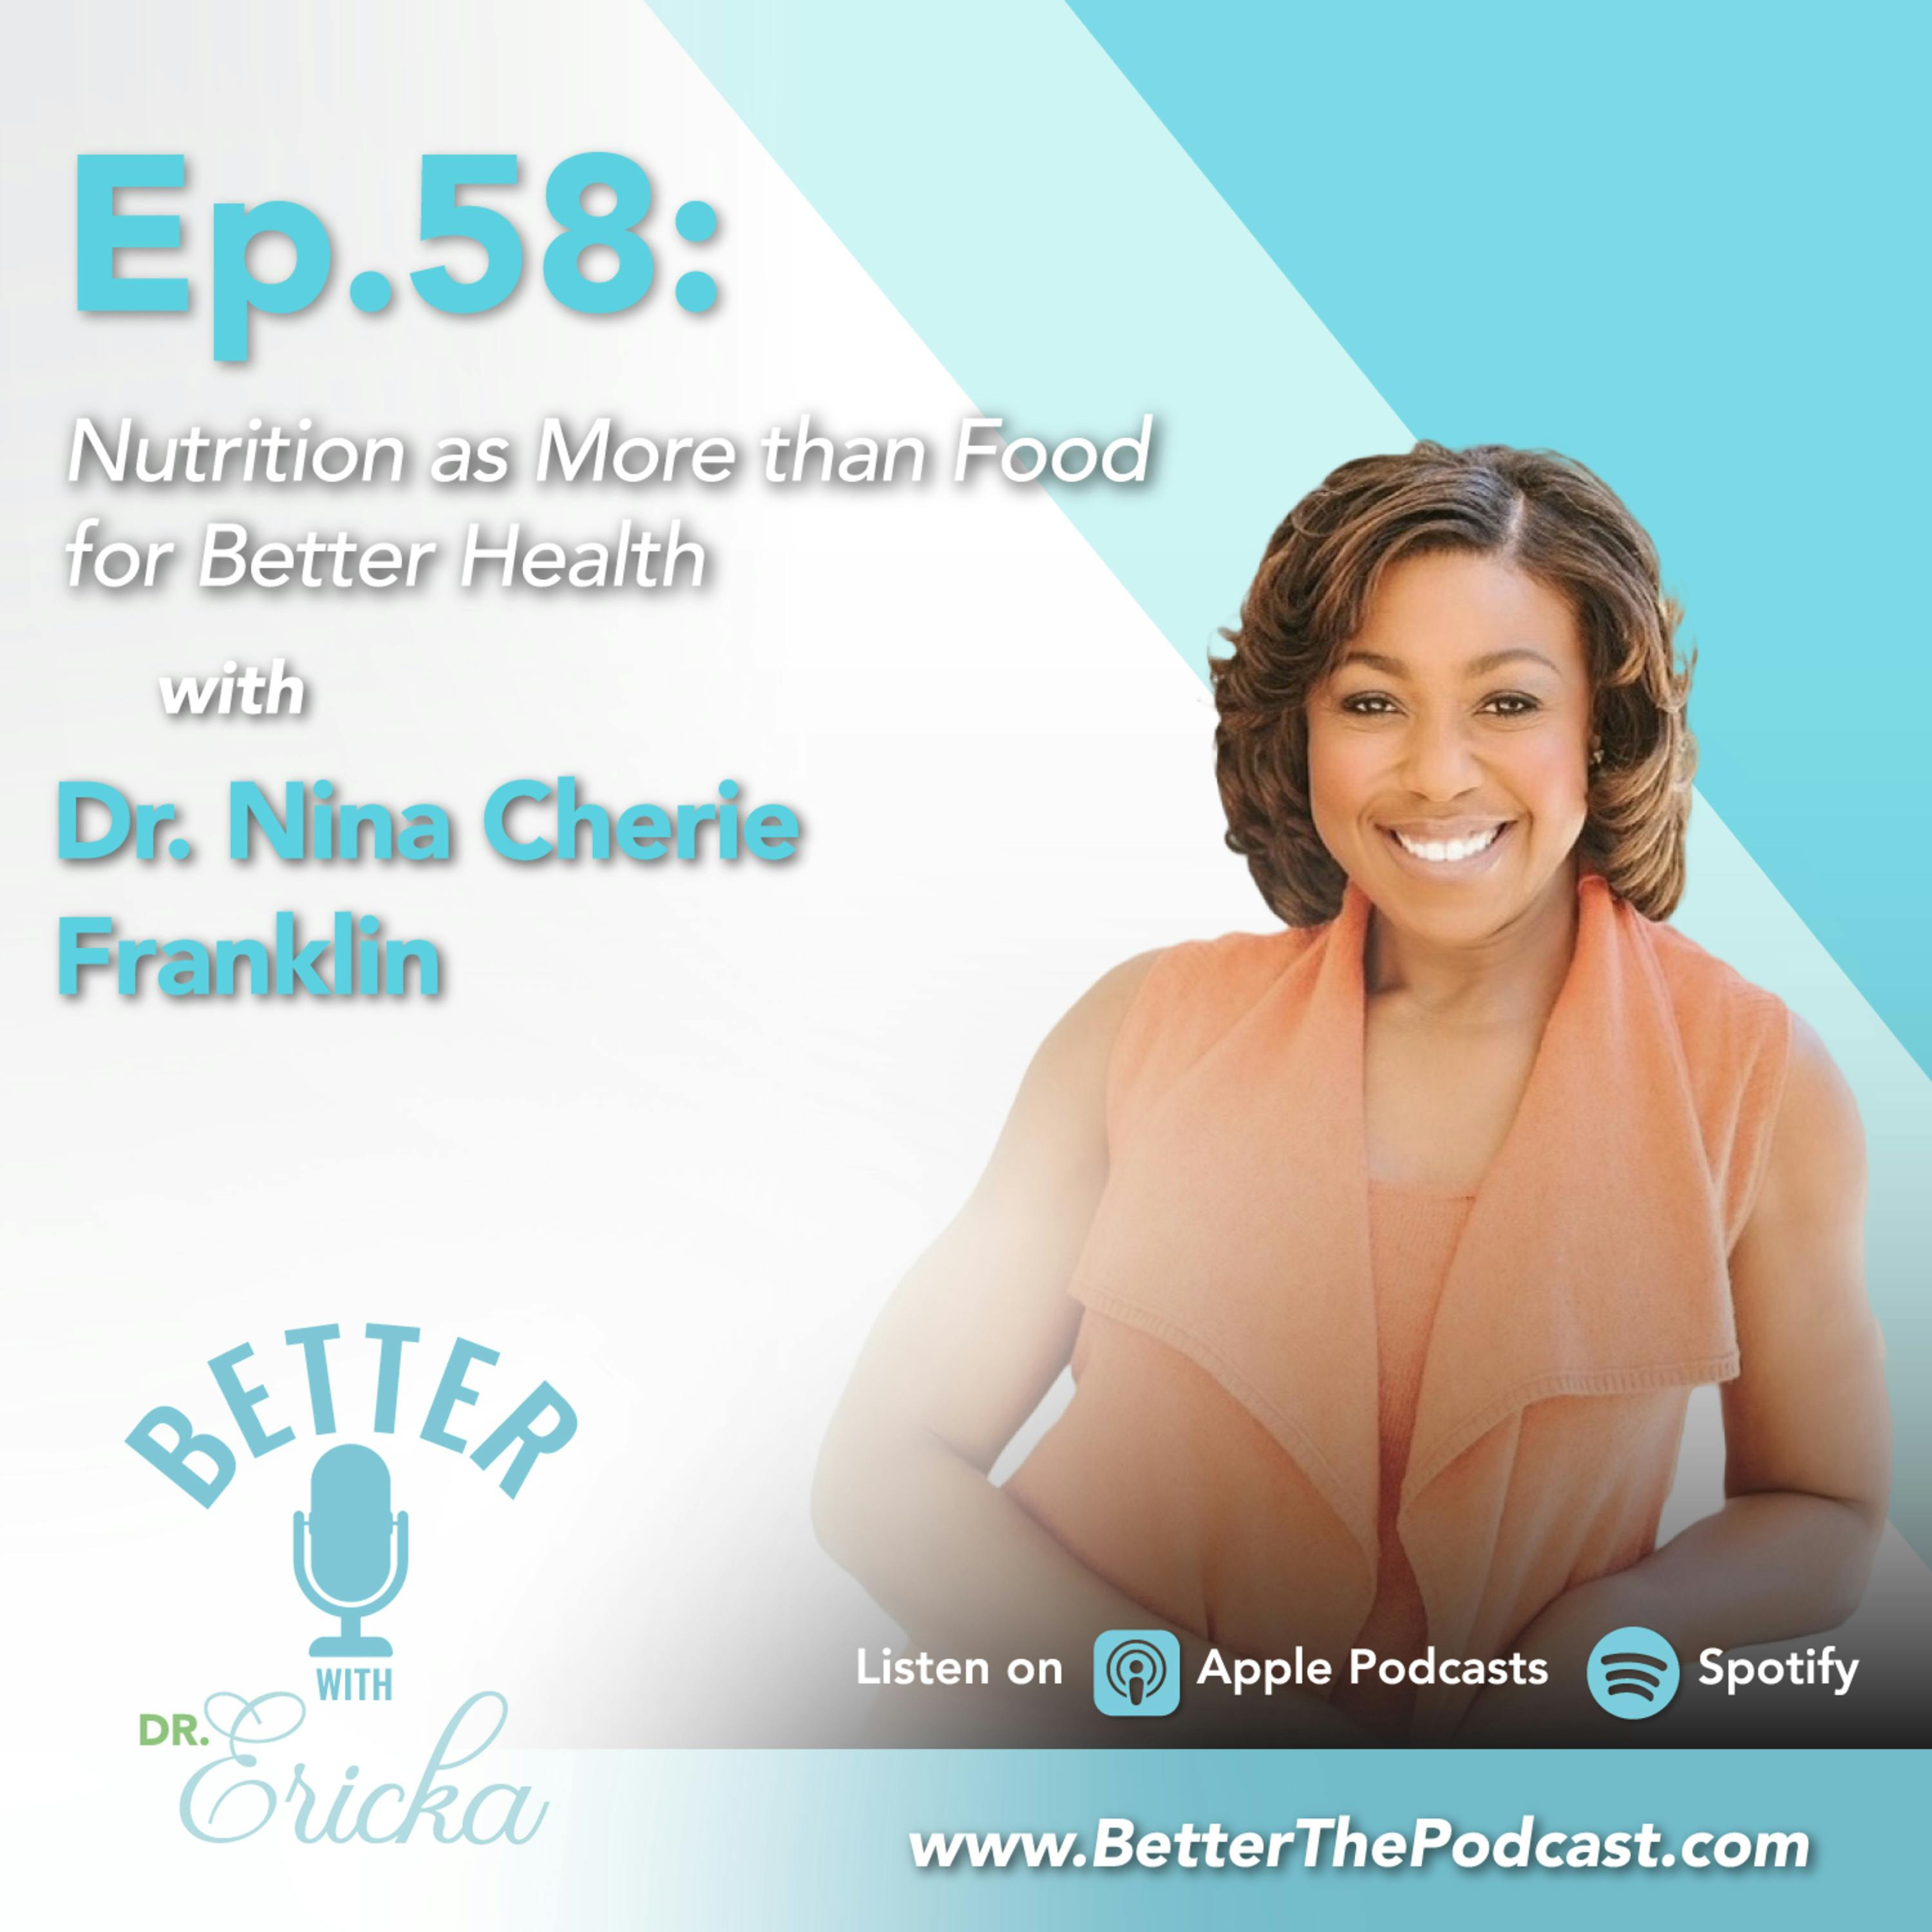 Nutrition as More than Food for Better Health with Nina Cherie Franklin